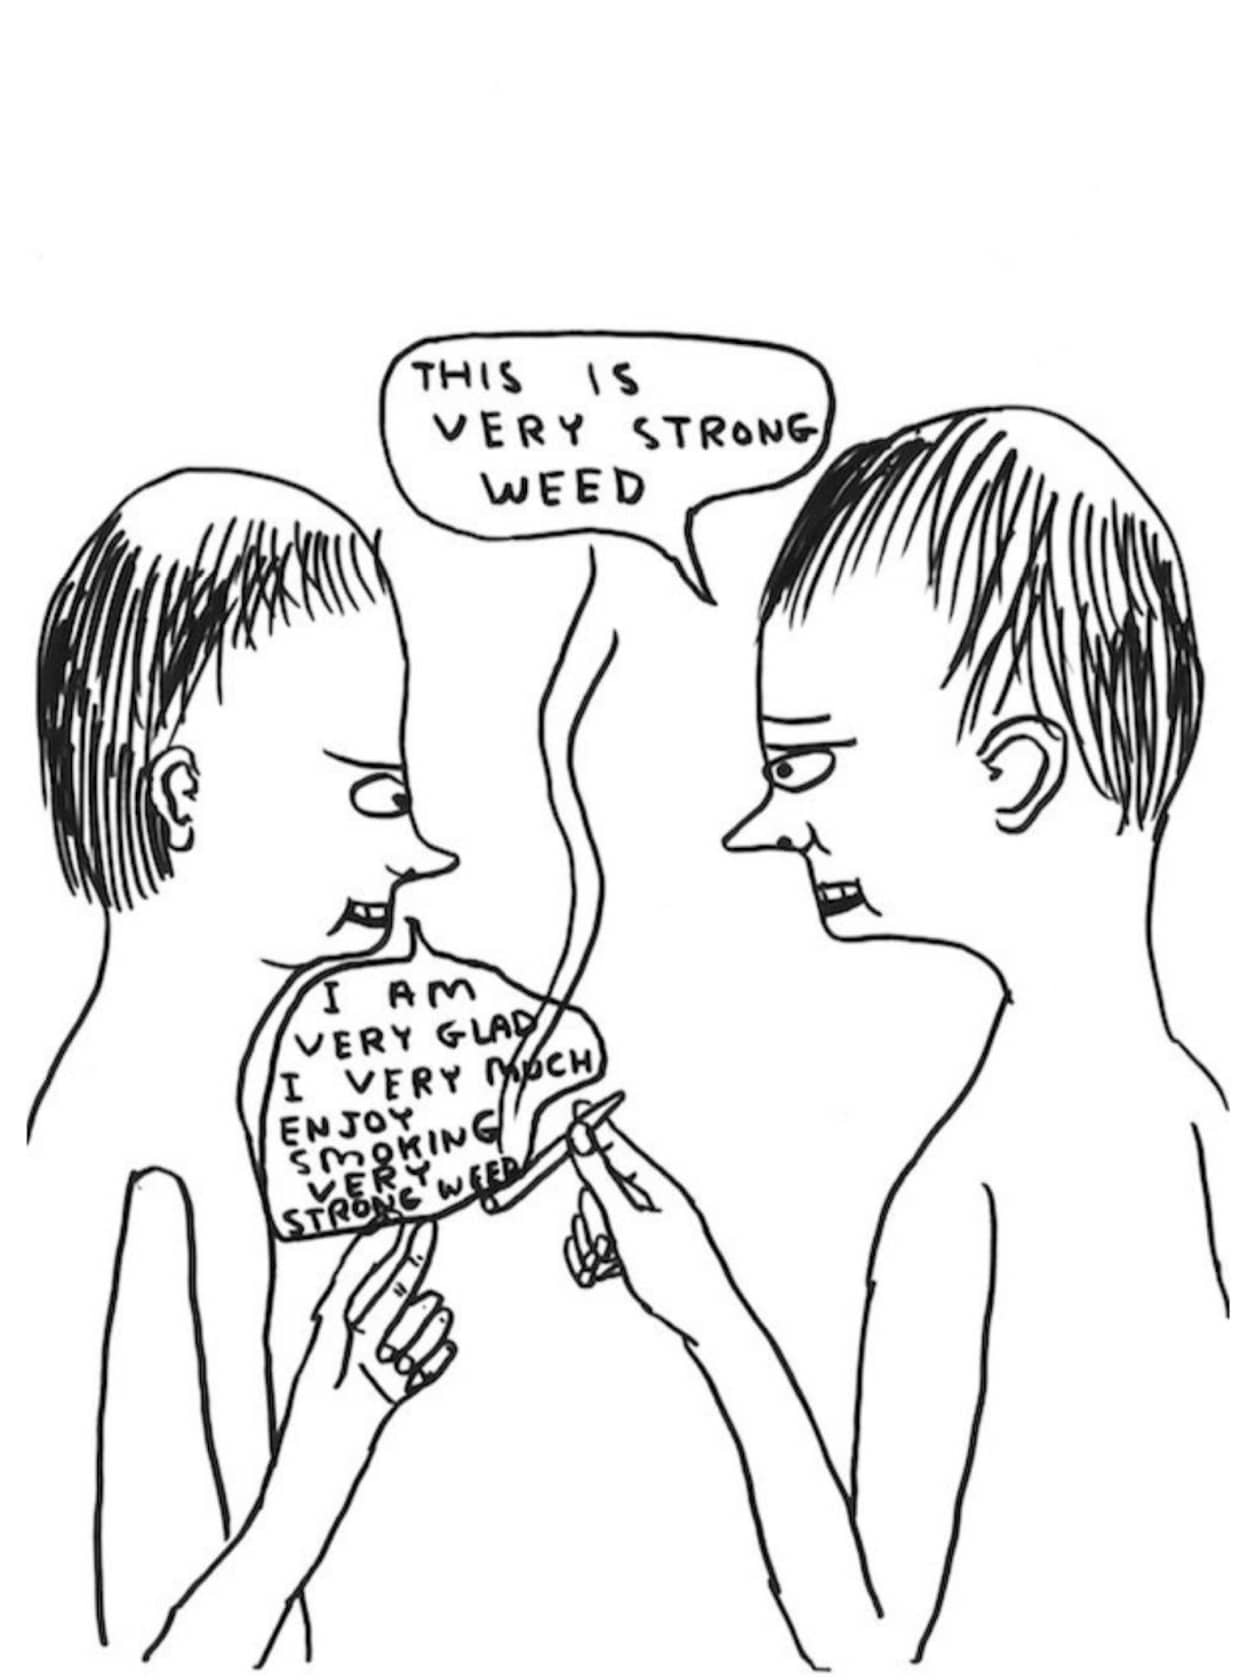 David Shrigley, Untitled (this is very strong weed), 2018